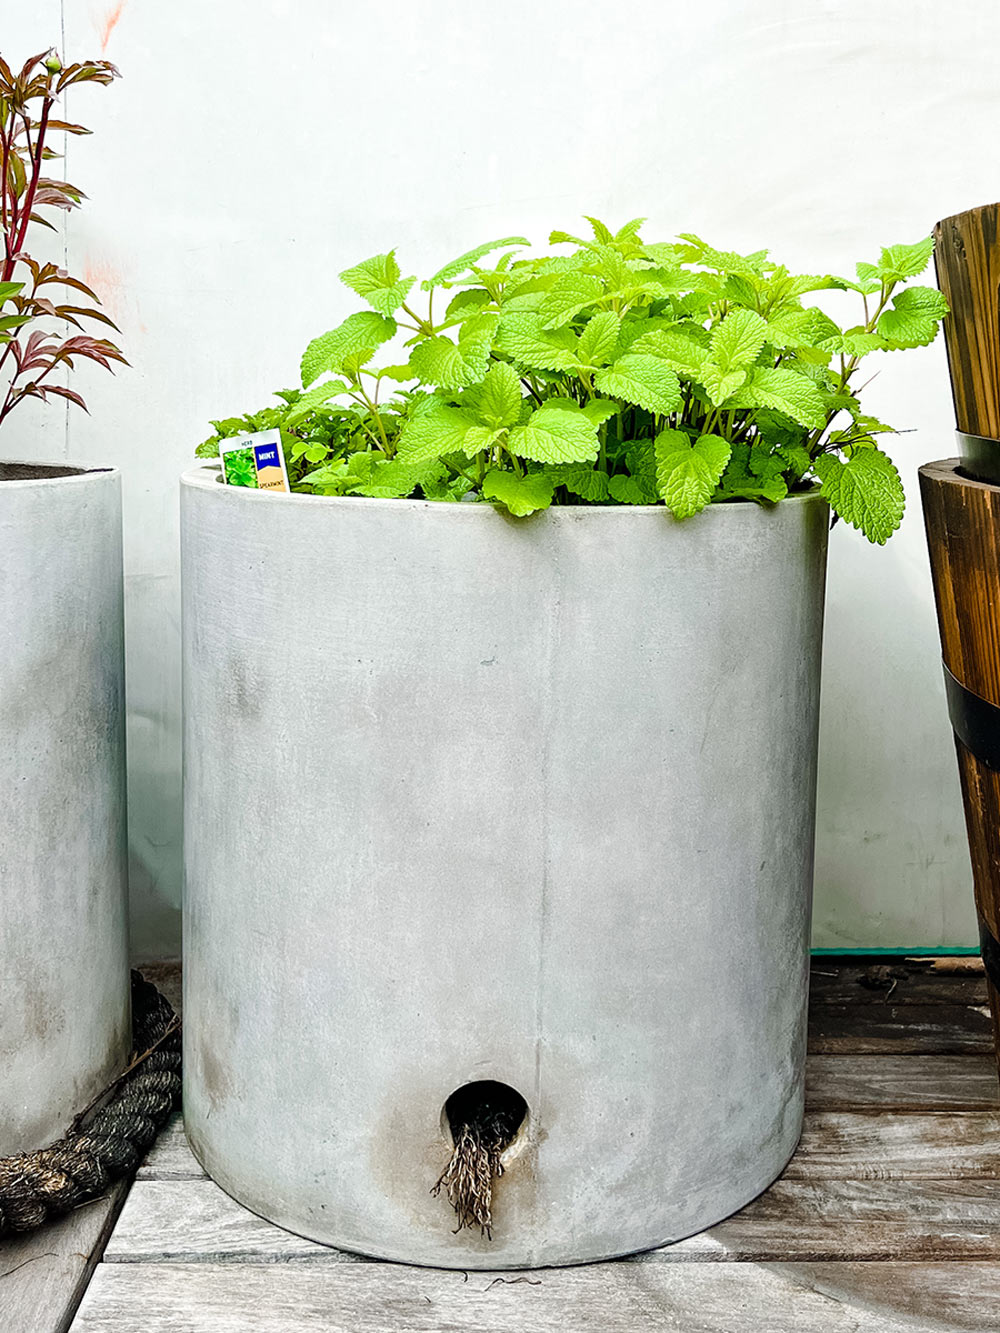 A grey planter with bright green herbs planted.